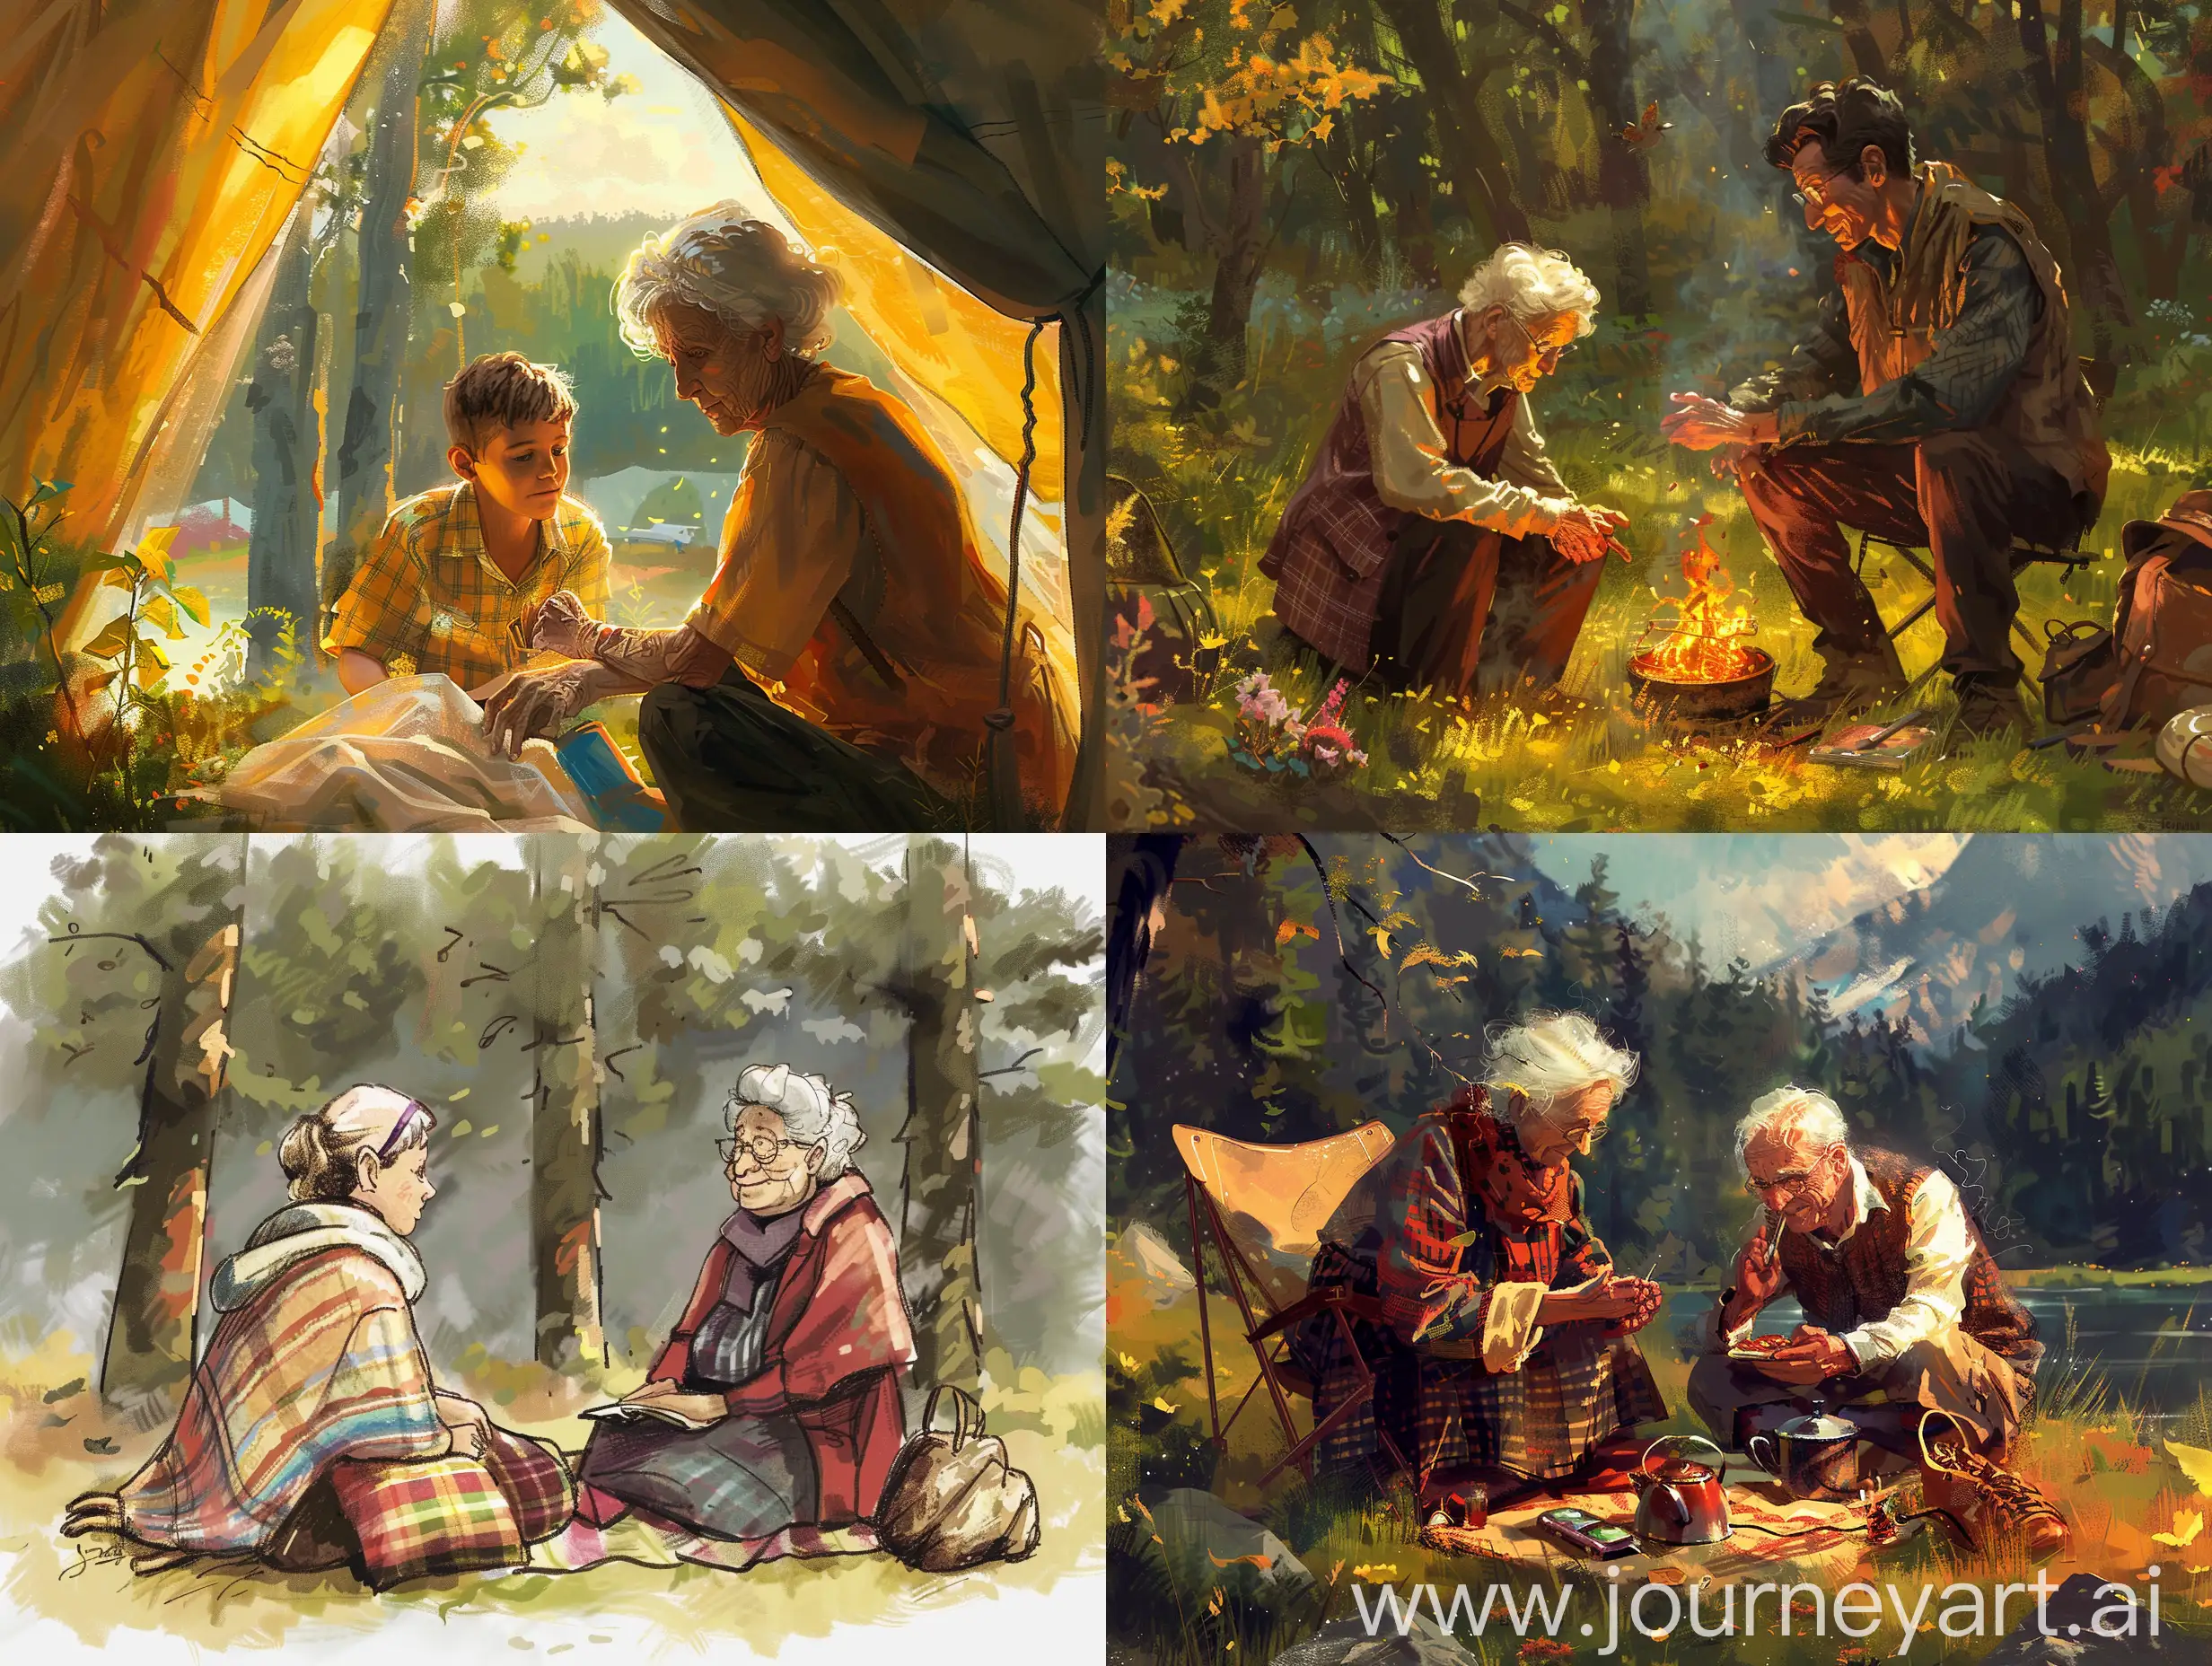 Elderly-Couple-Fondly-Recalls-Youthful-Memories-While-Preparing-for-Grandchildrens-Camp